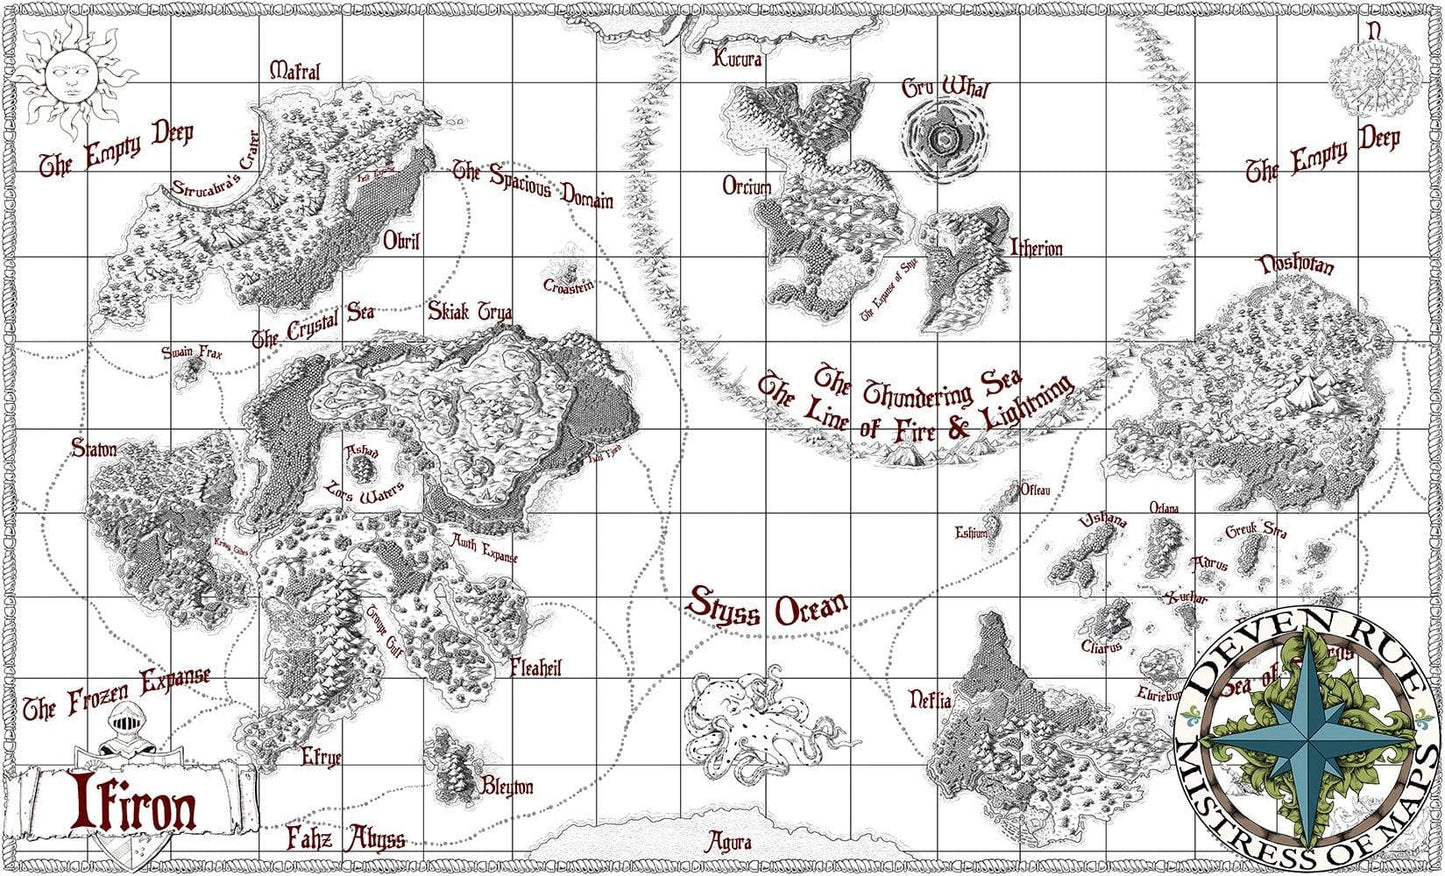 The Ifiron map in black and white with labels by Deven Rue.